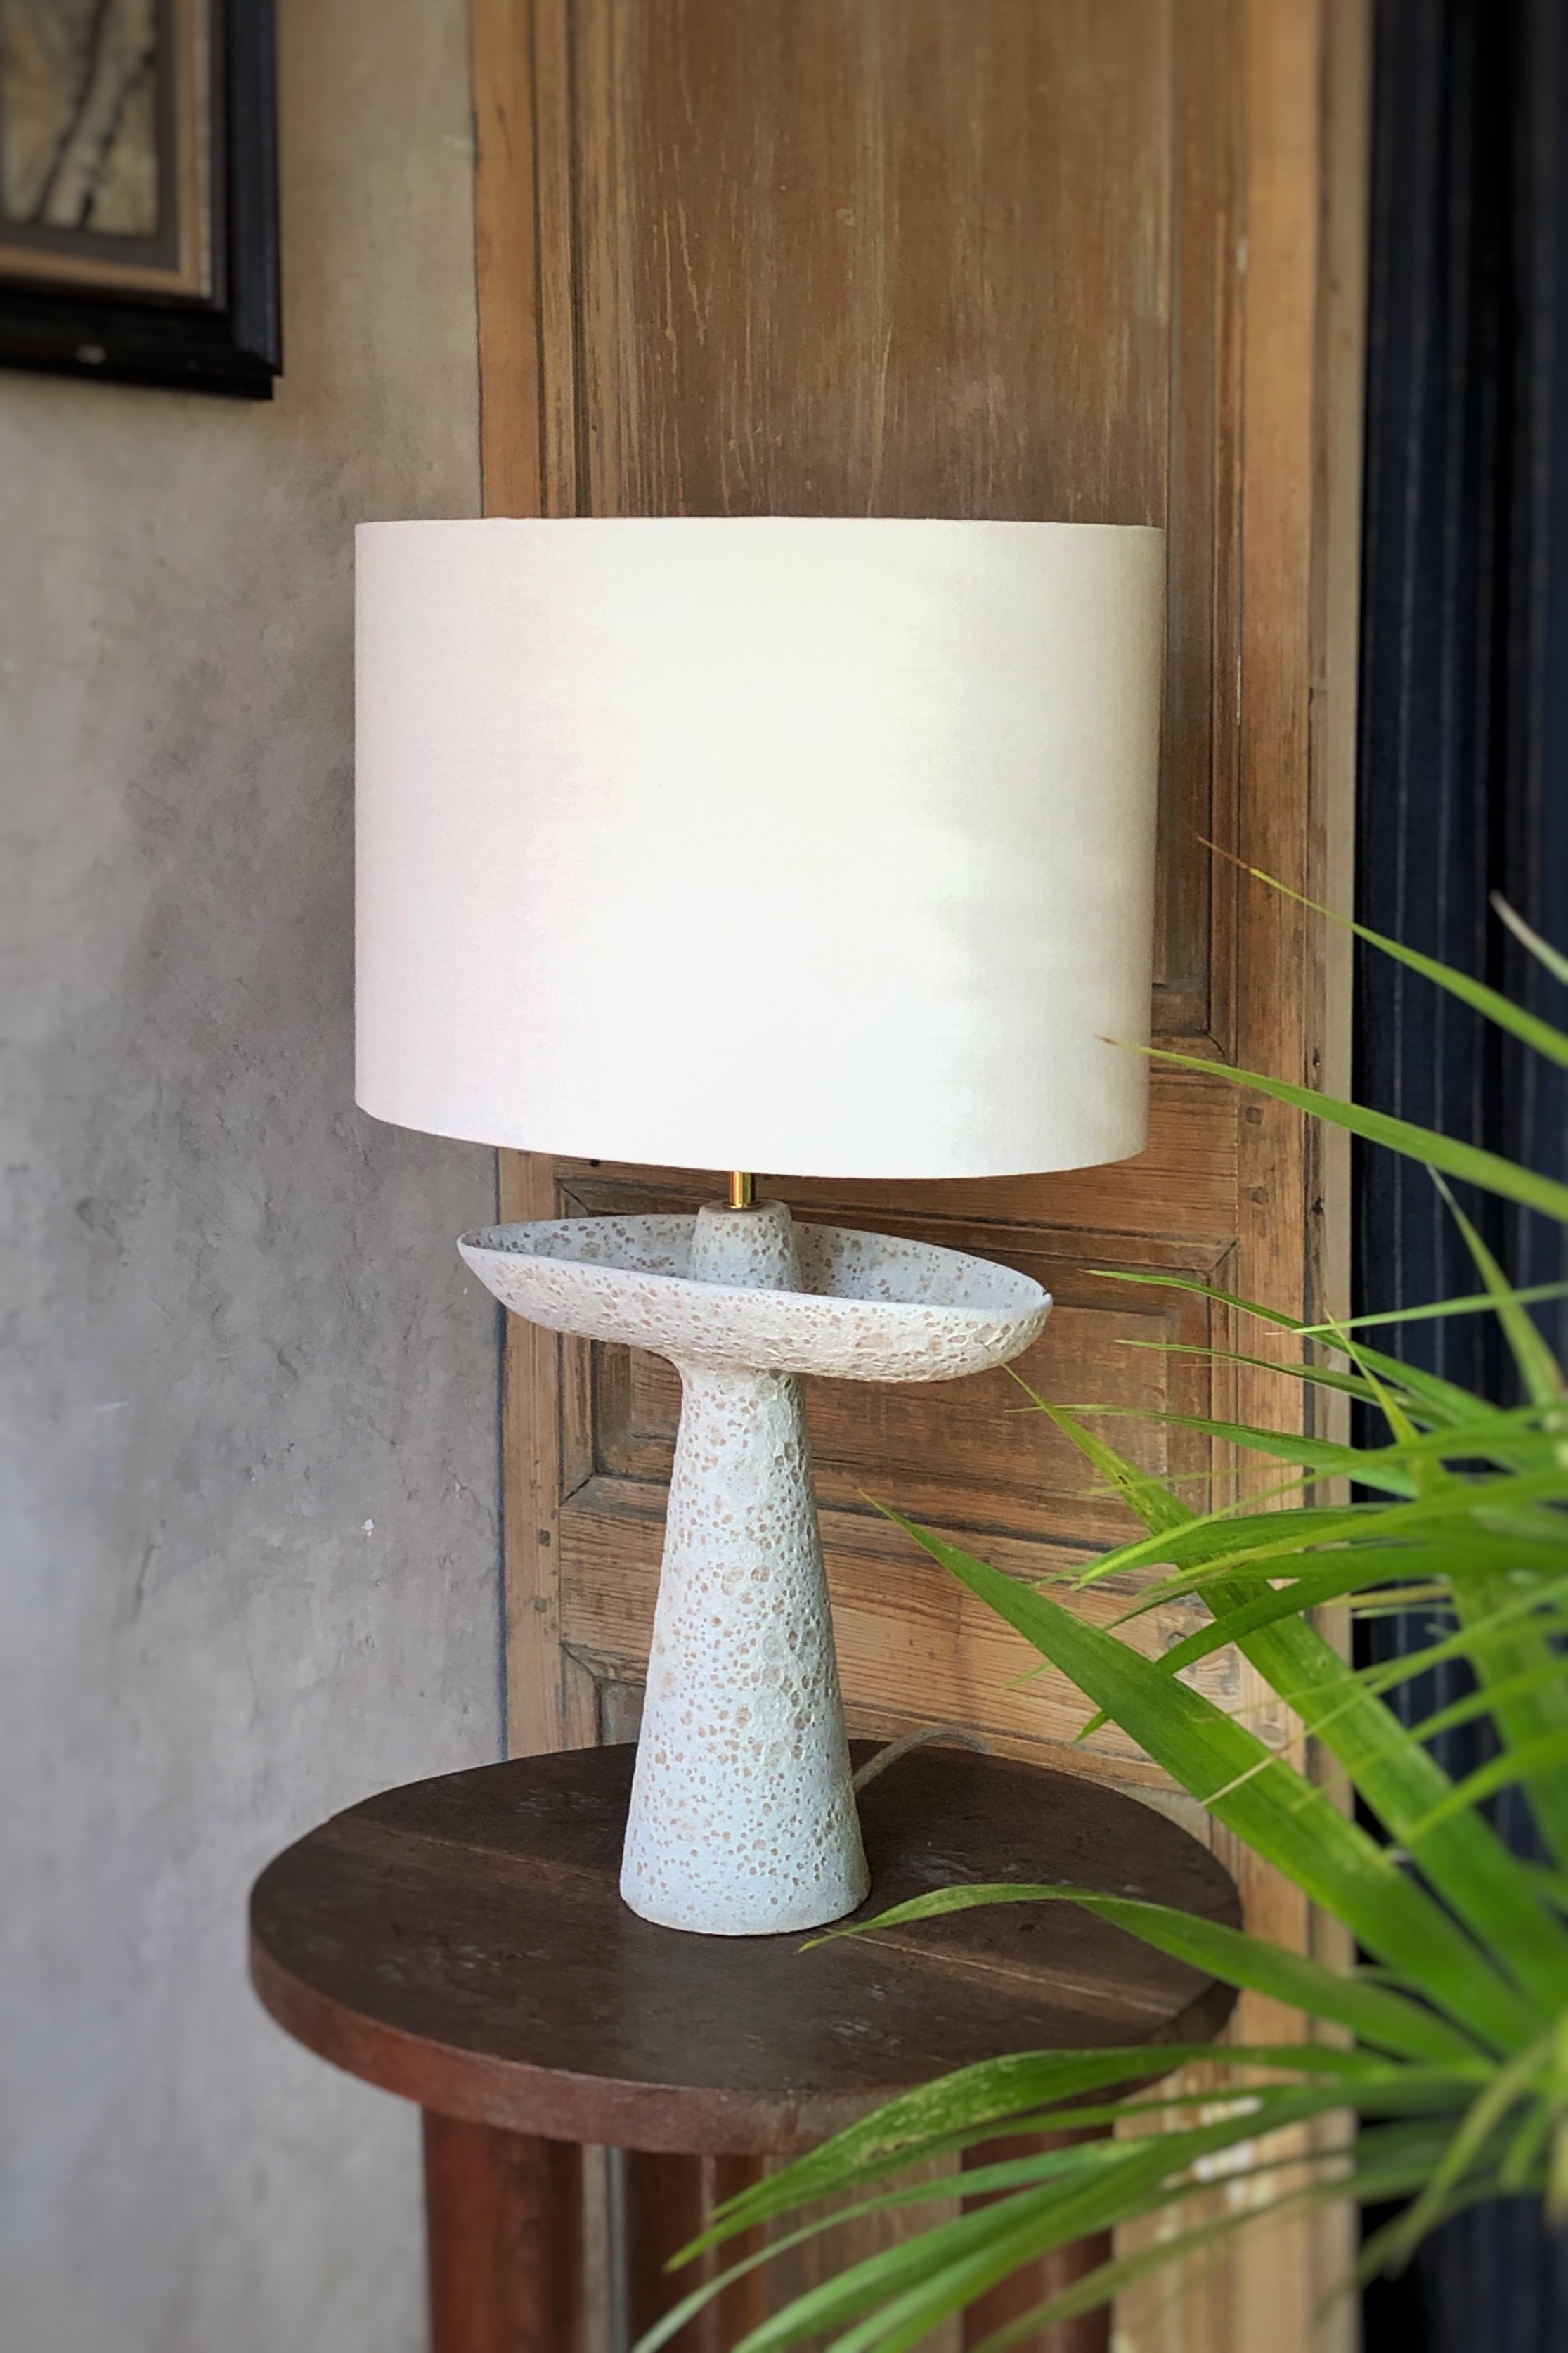 L05 Crater Lamp by Sophie Vaidie
One Of A Kind.
Dimensions: D 28 x W 40 x H 64 cm. 
Materials: Beige stoneware with crater glaze and white linen fabric.

All our lamps can be wired according to each country. If sold to the USA it will be wired for